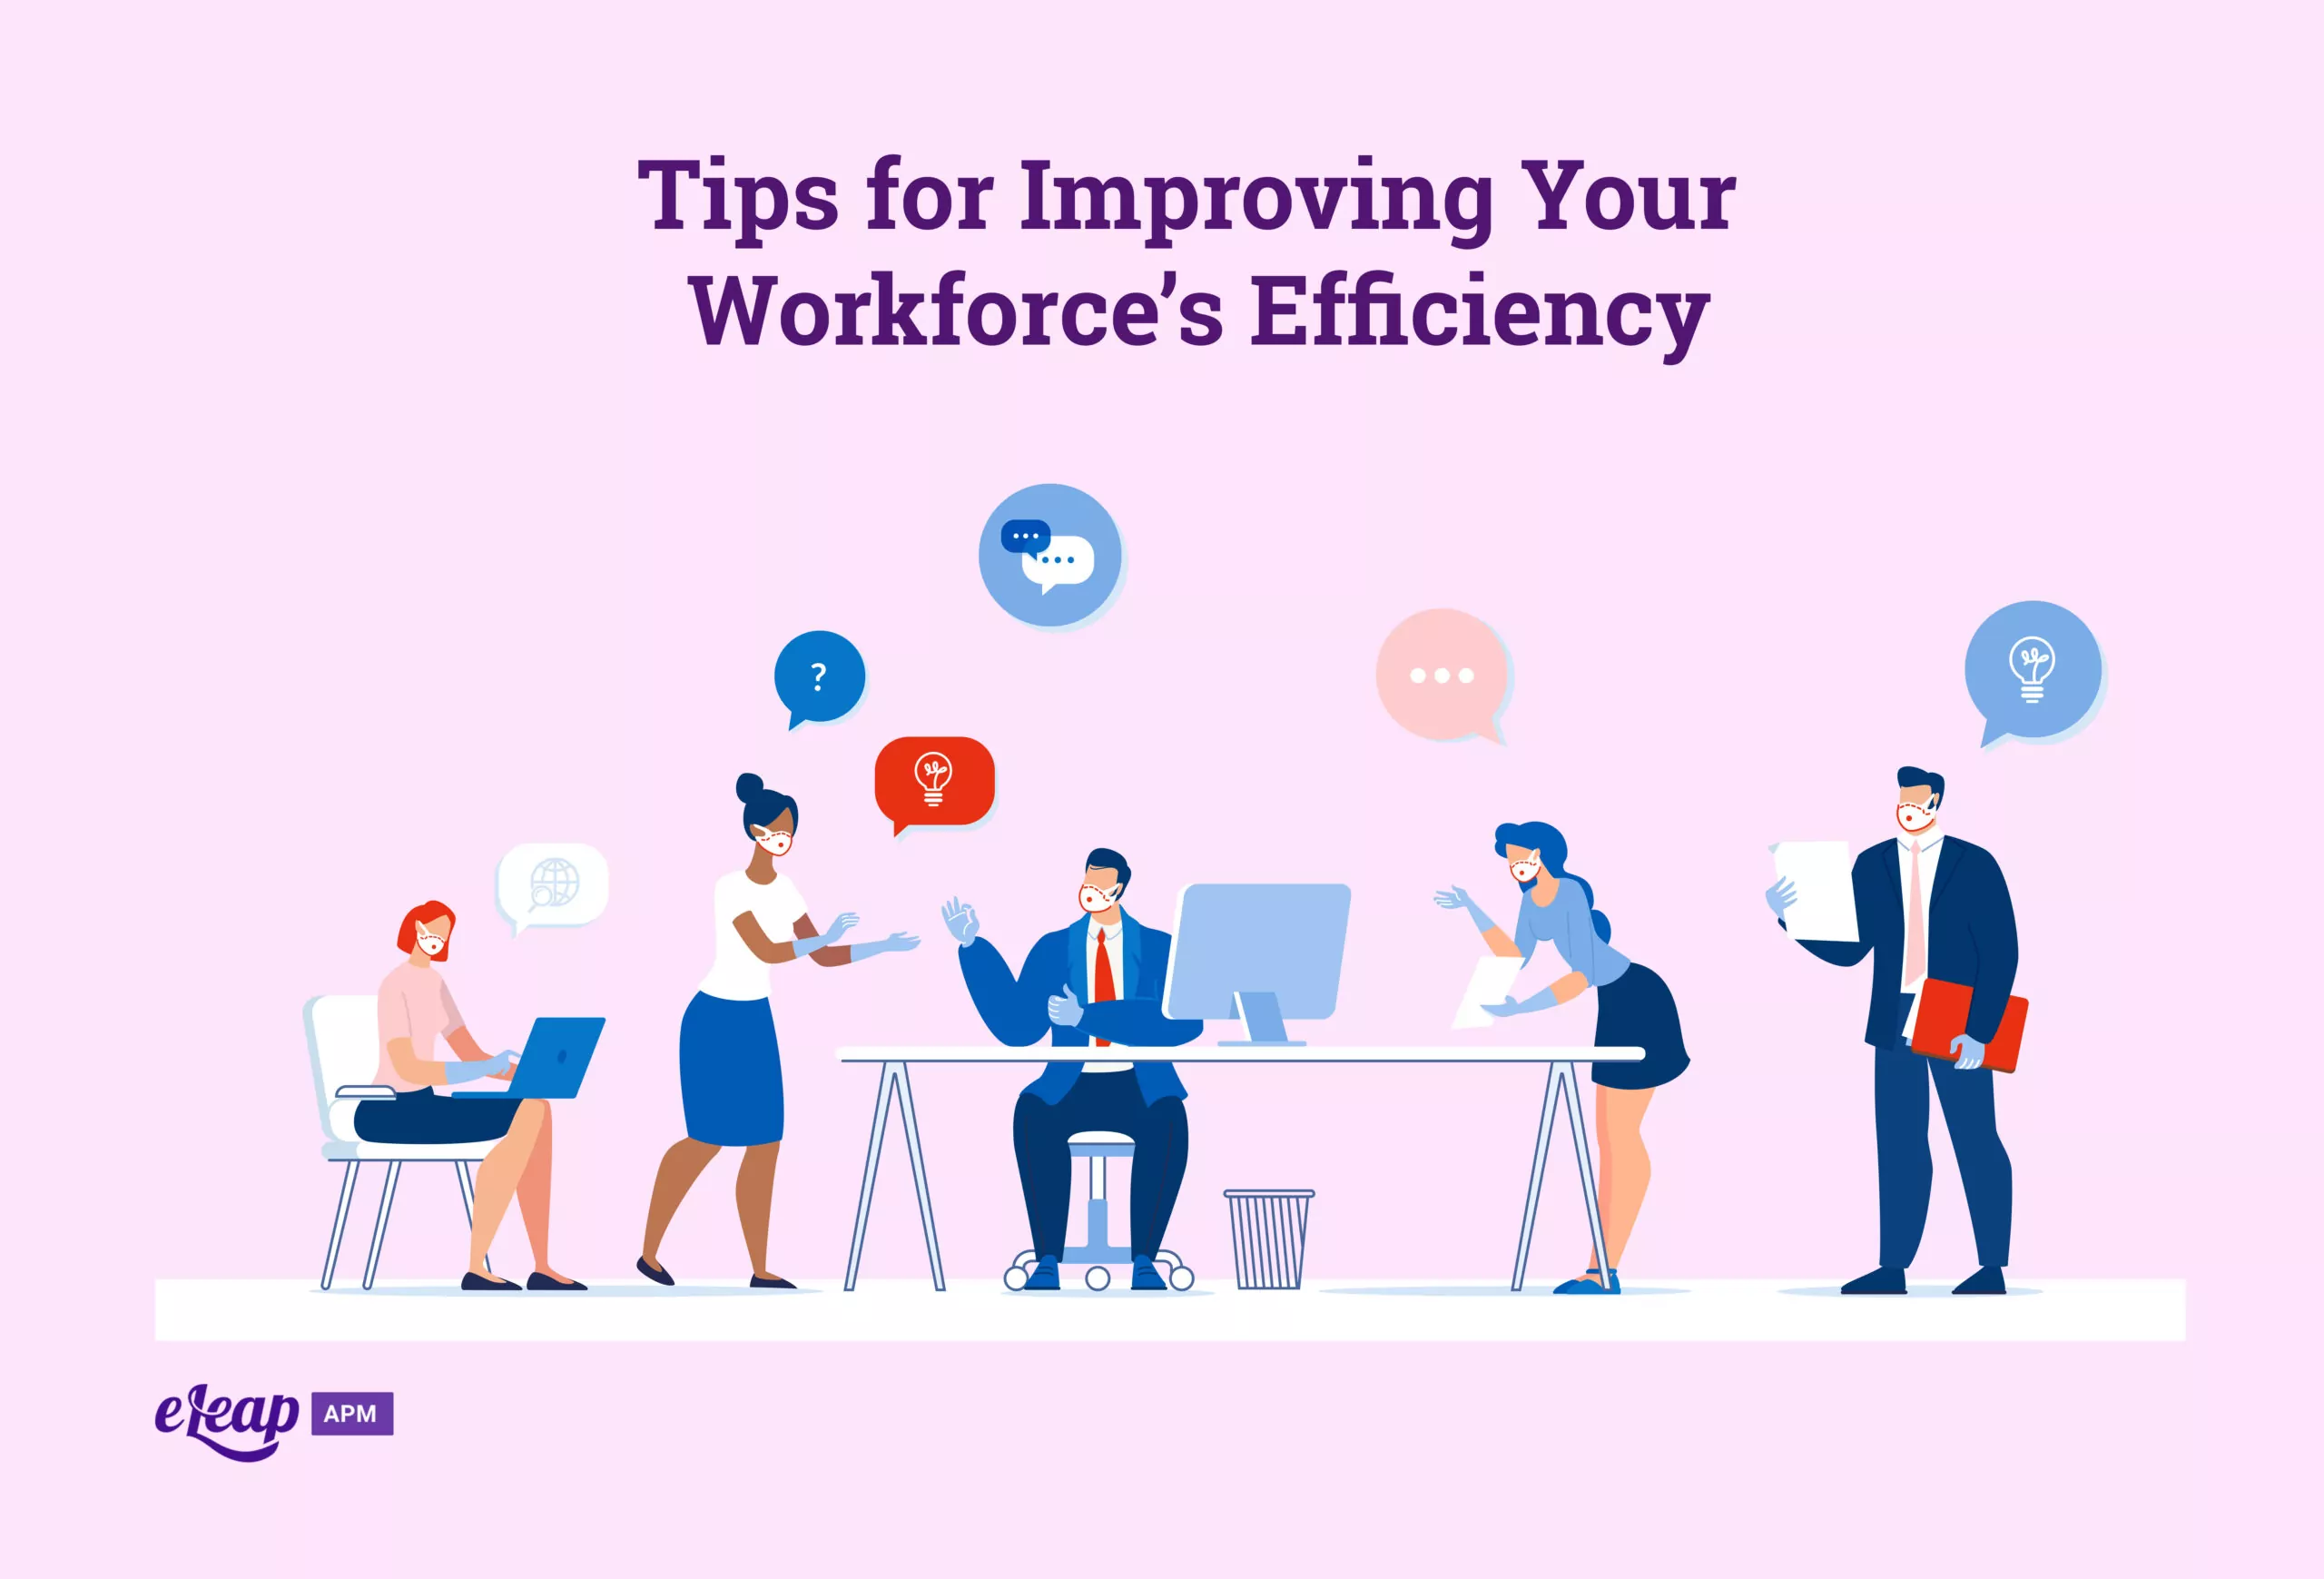 Tips for Improving Your Workforce’s Efficiency